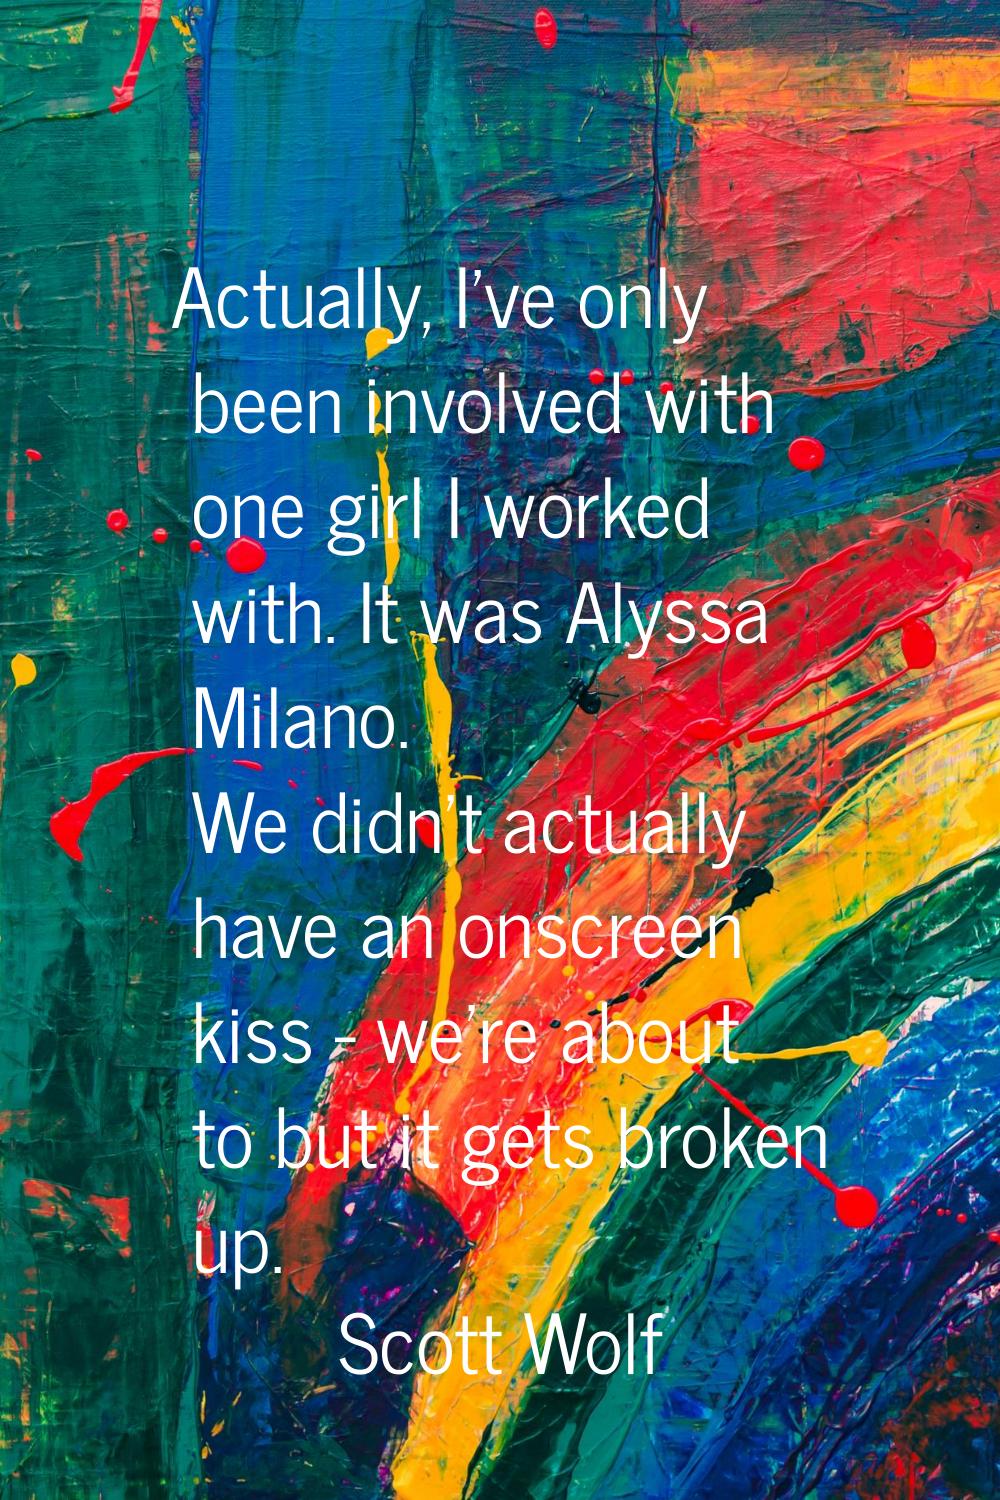 Actually, I've only been involved with one girl I worked with. It was Alyssa Milano. We didn't actu